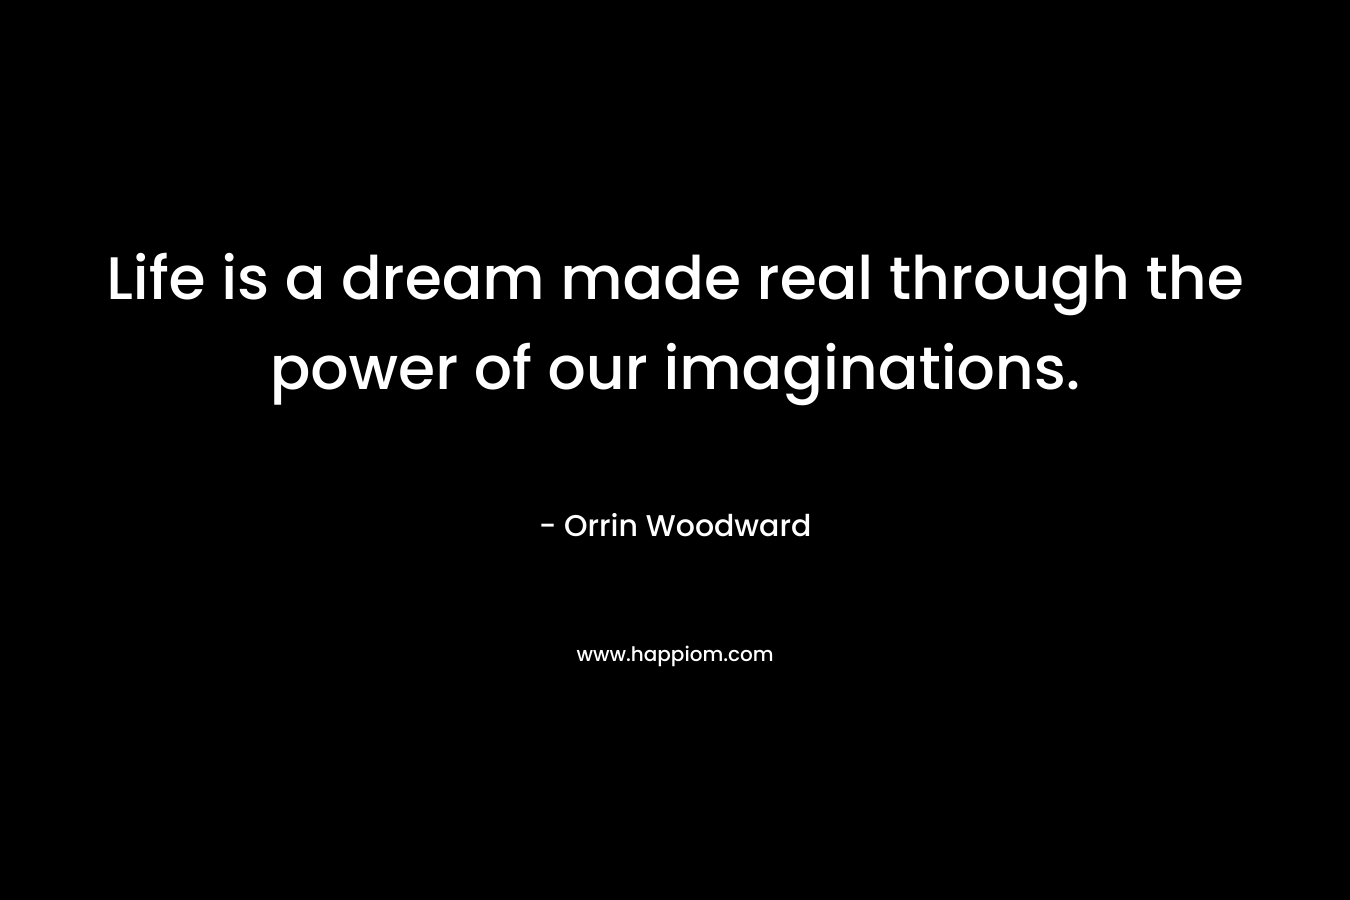 Life is a dream made real through the power of our imaginations.